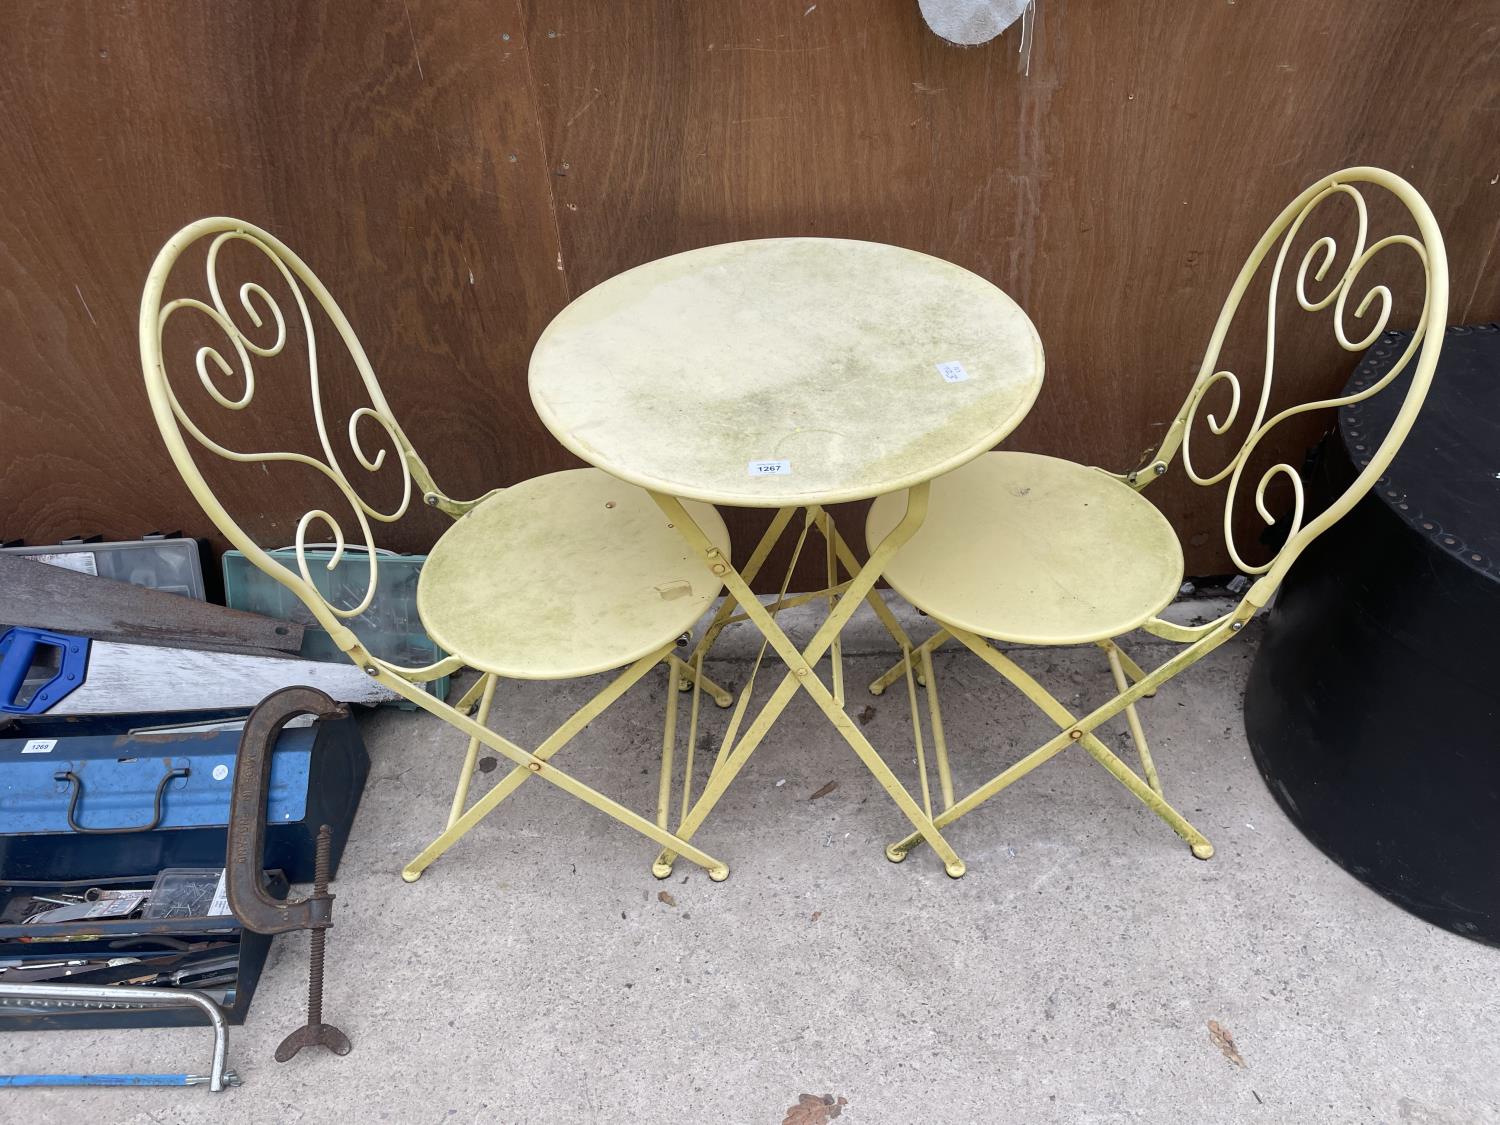 A FOLDING METAL BISTRO SET COMPRISING OF A ROUND TABLE AND TWO CHAIRS